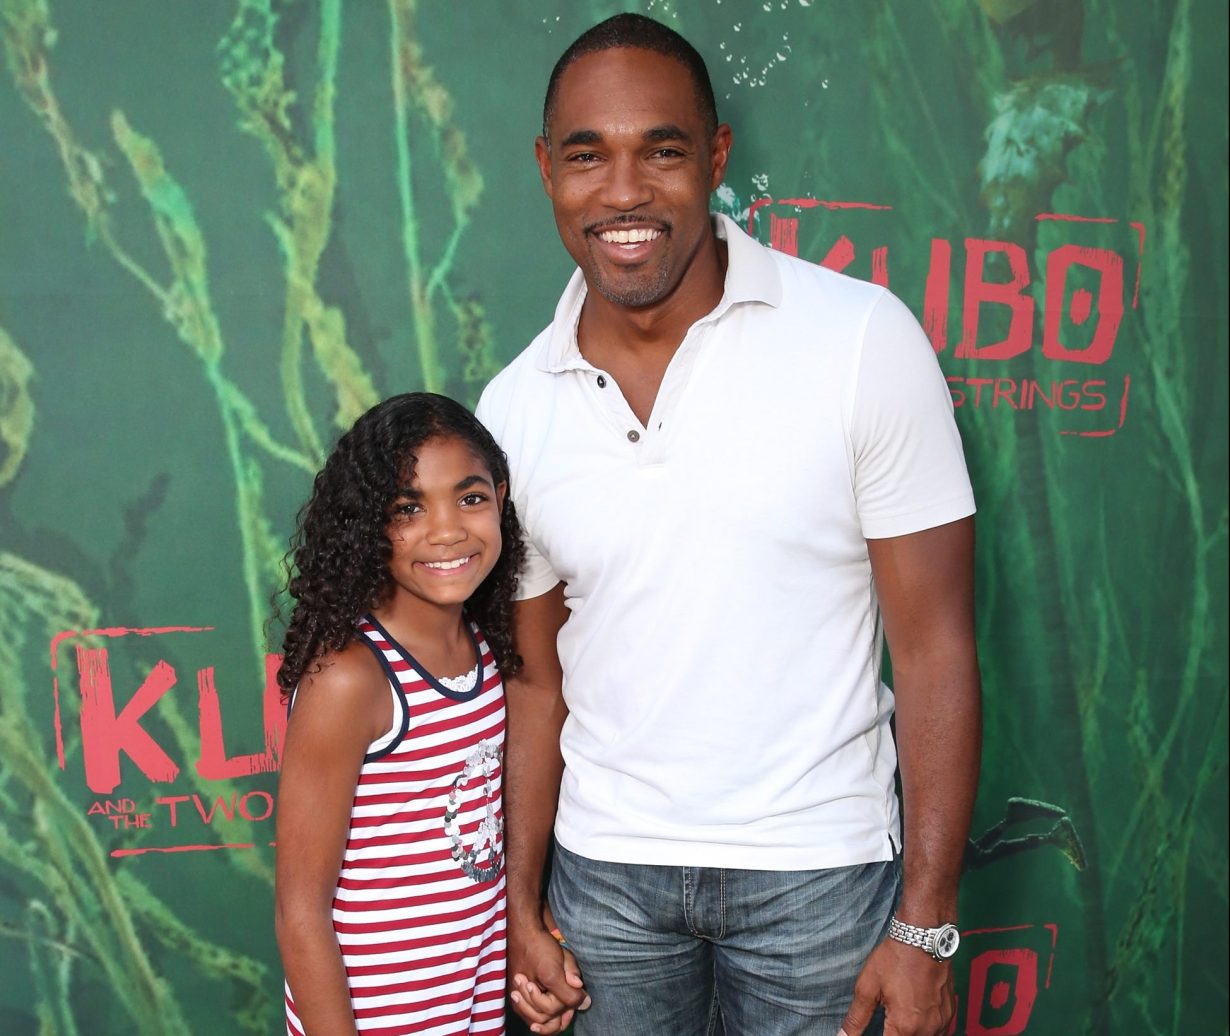 UNIVERSAL CITY, CA - AUGUST 14: Jason George and daughter attend the premiere of Focus Features' "Kubo And The Two Strings" at AMC Universal City Walk on August 14, 2016 in Universal City, California. (Photo by Todd Williamson/Getty Images)